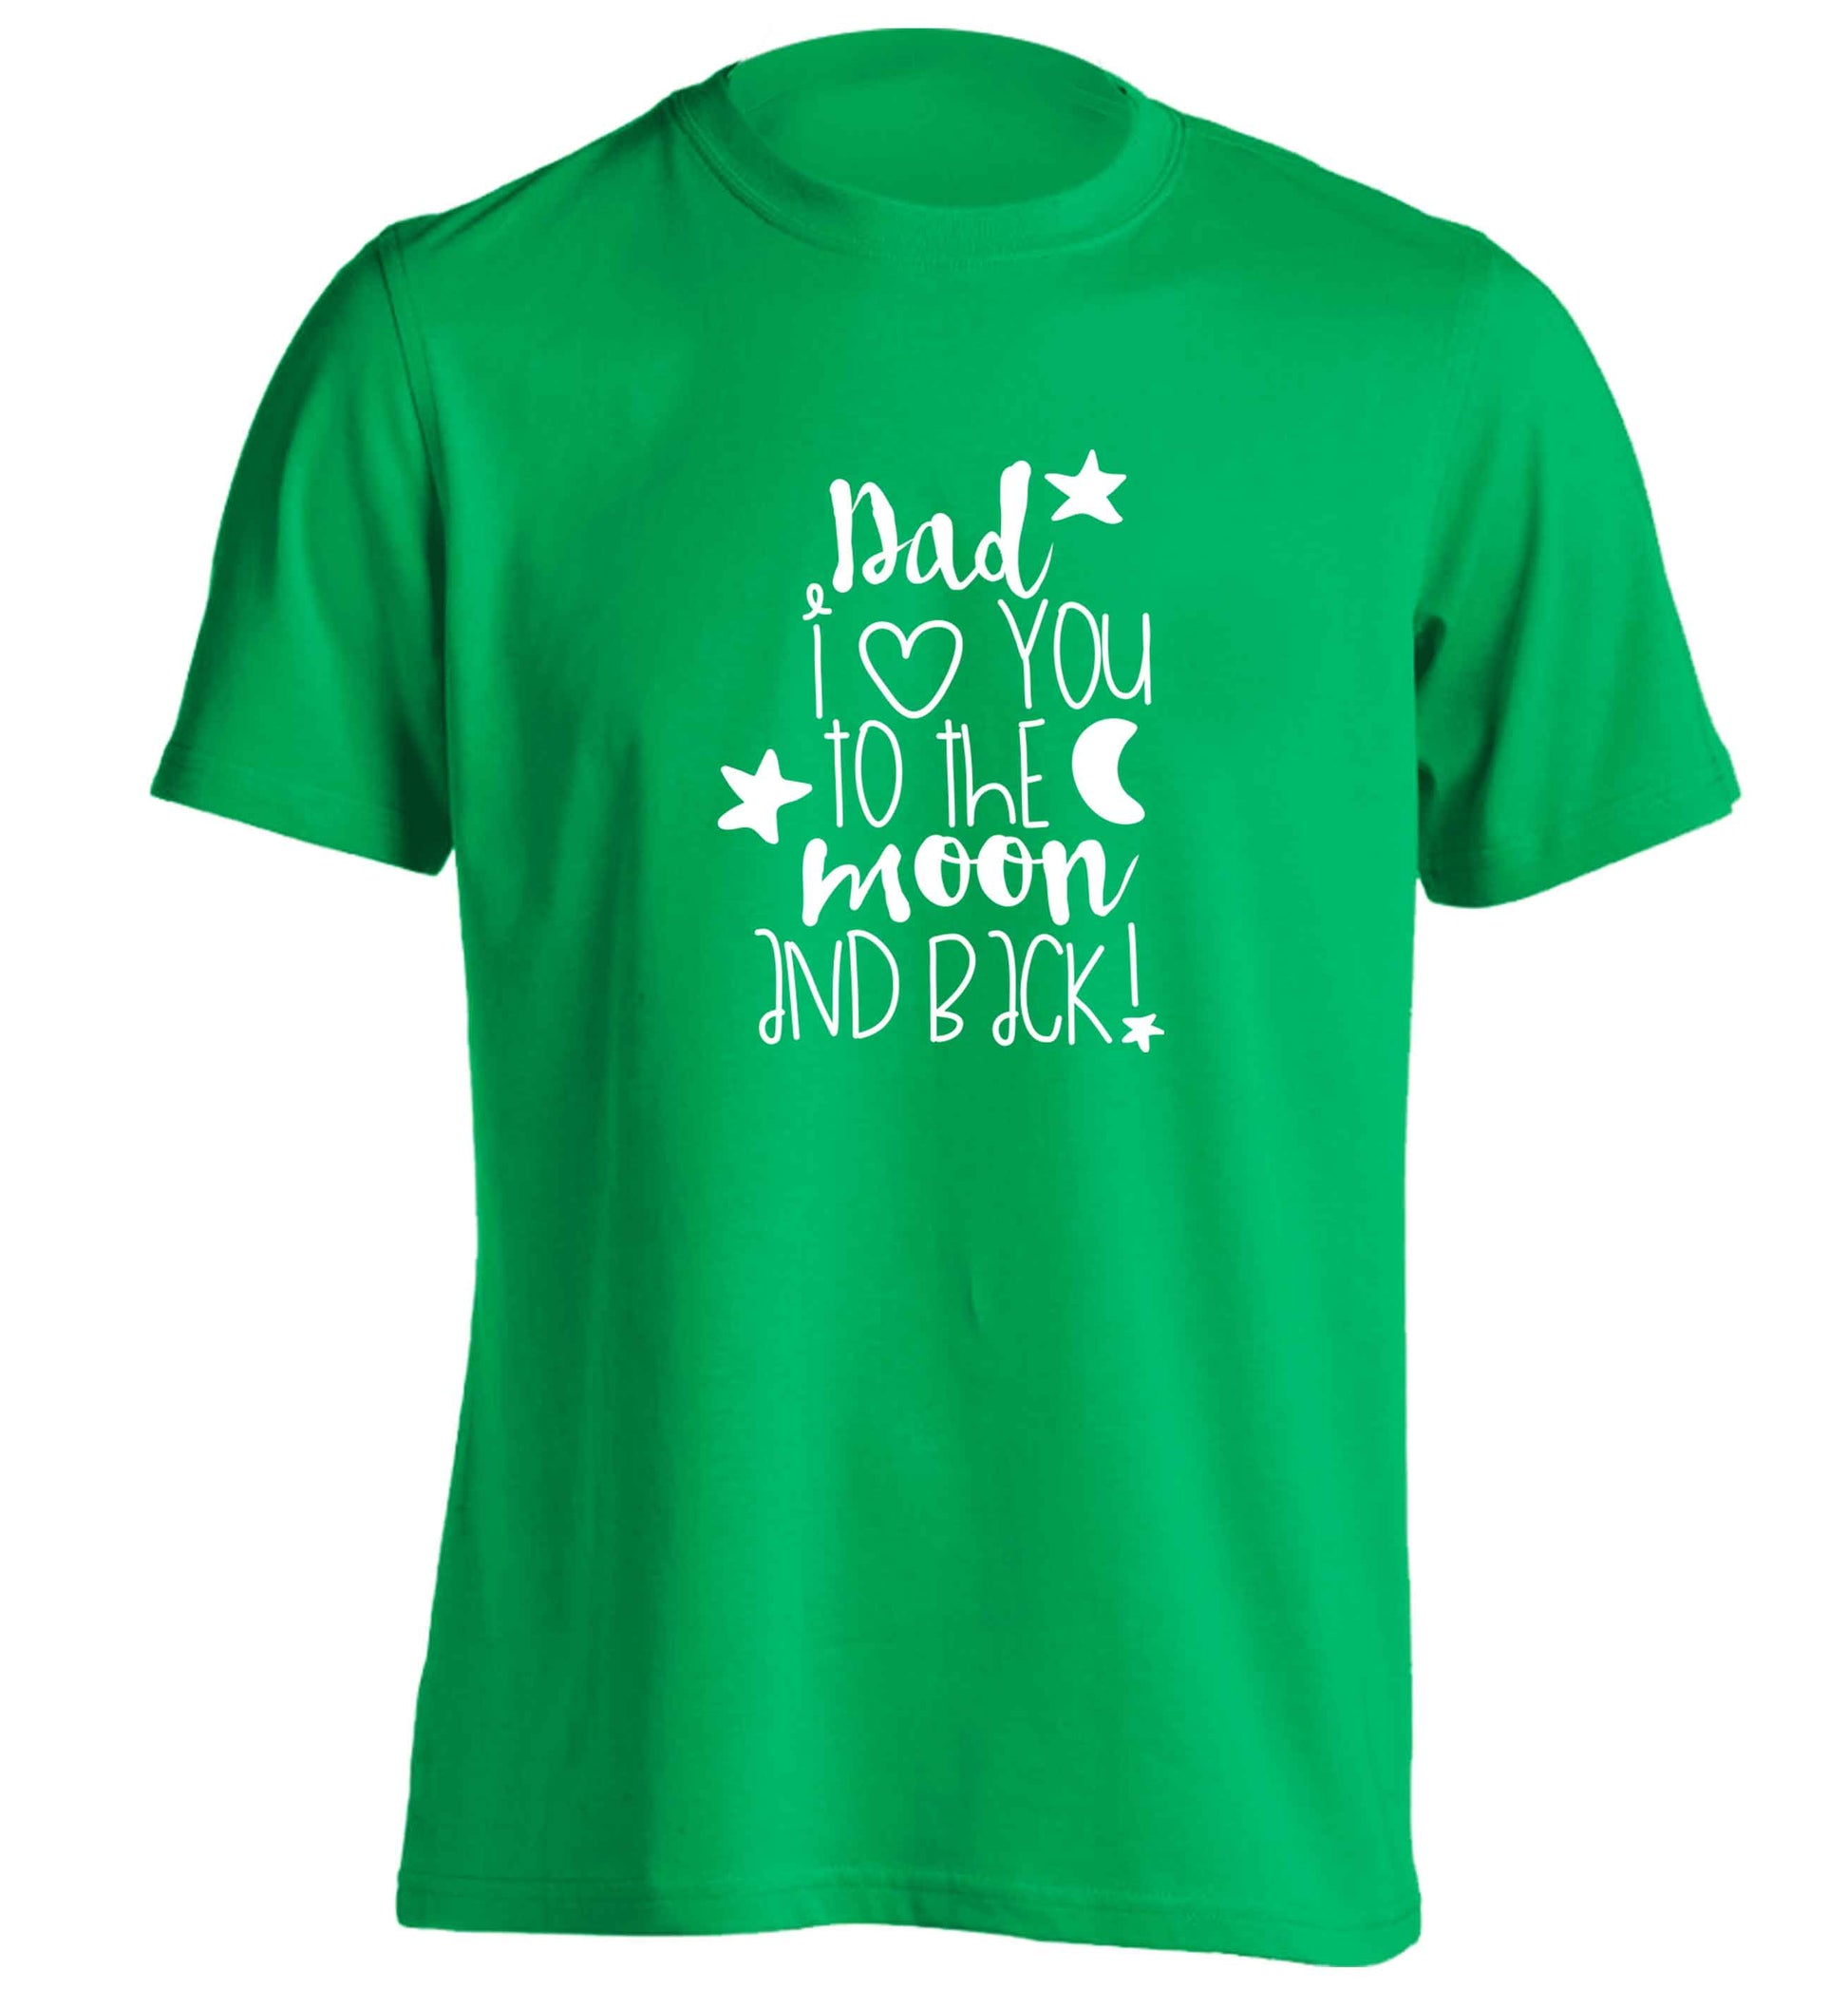 Dad I love you to the moon and back adults unisex green Tshirt 2XL